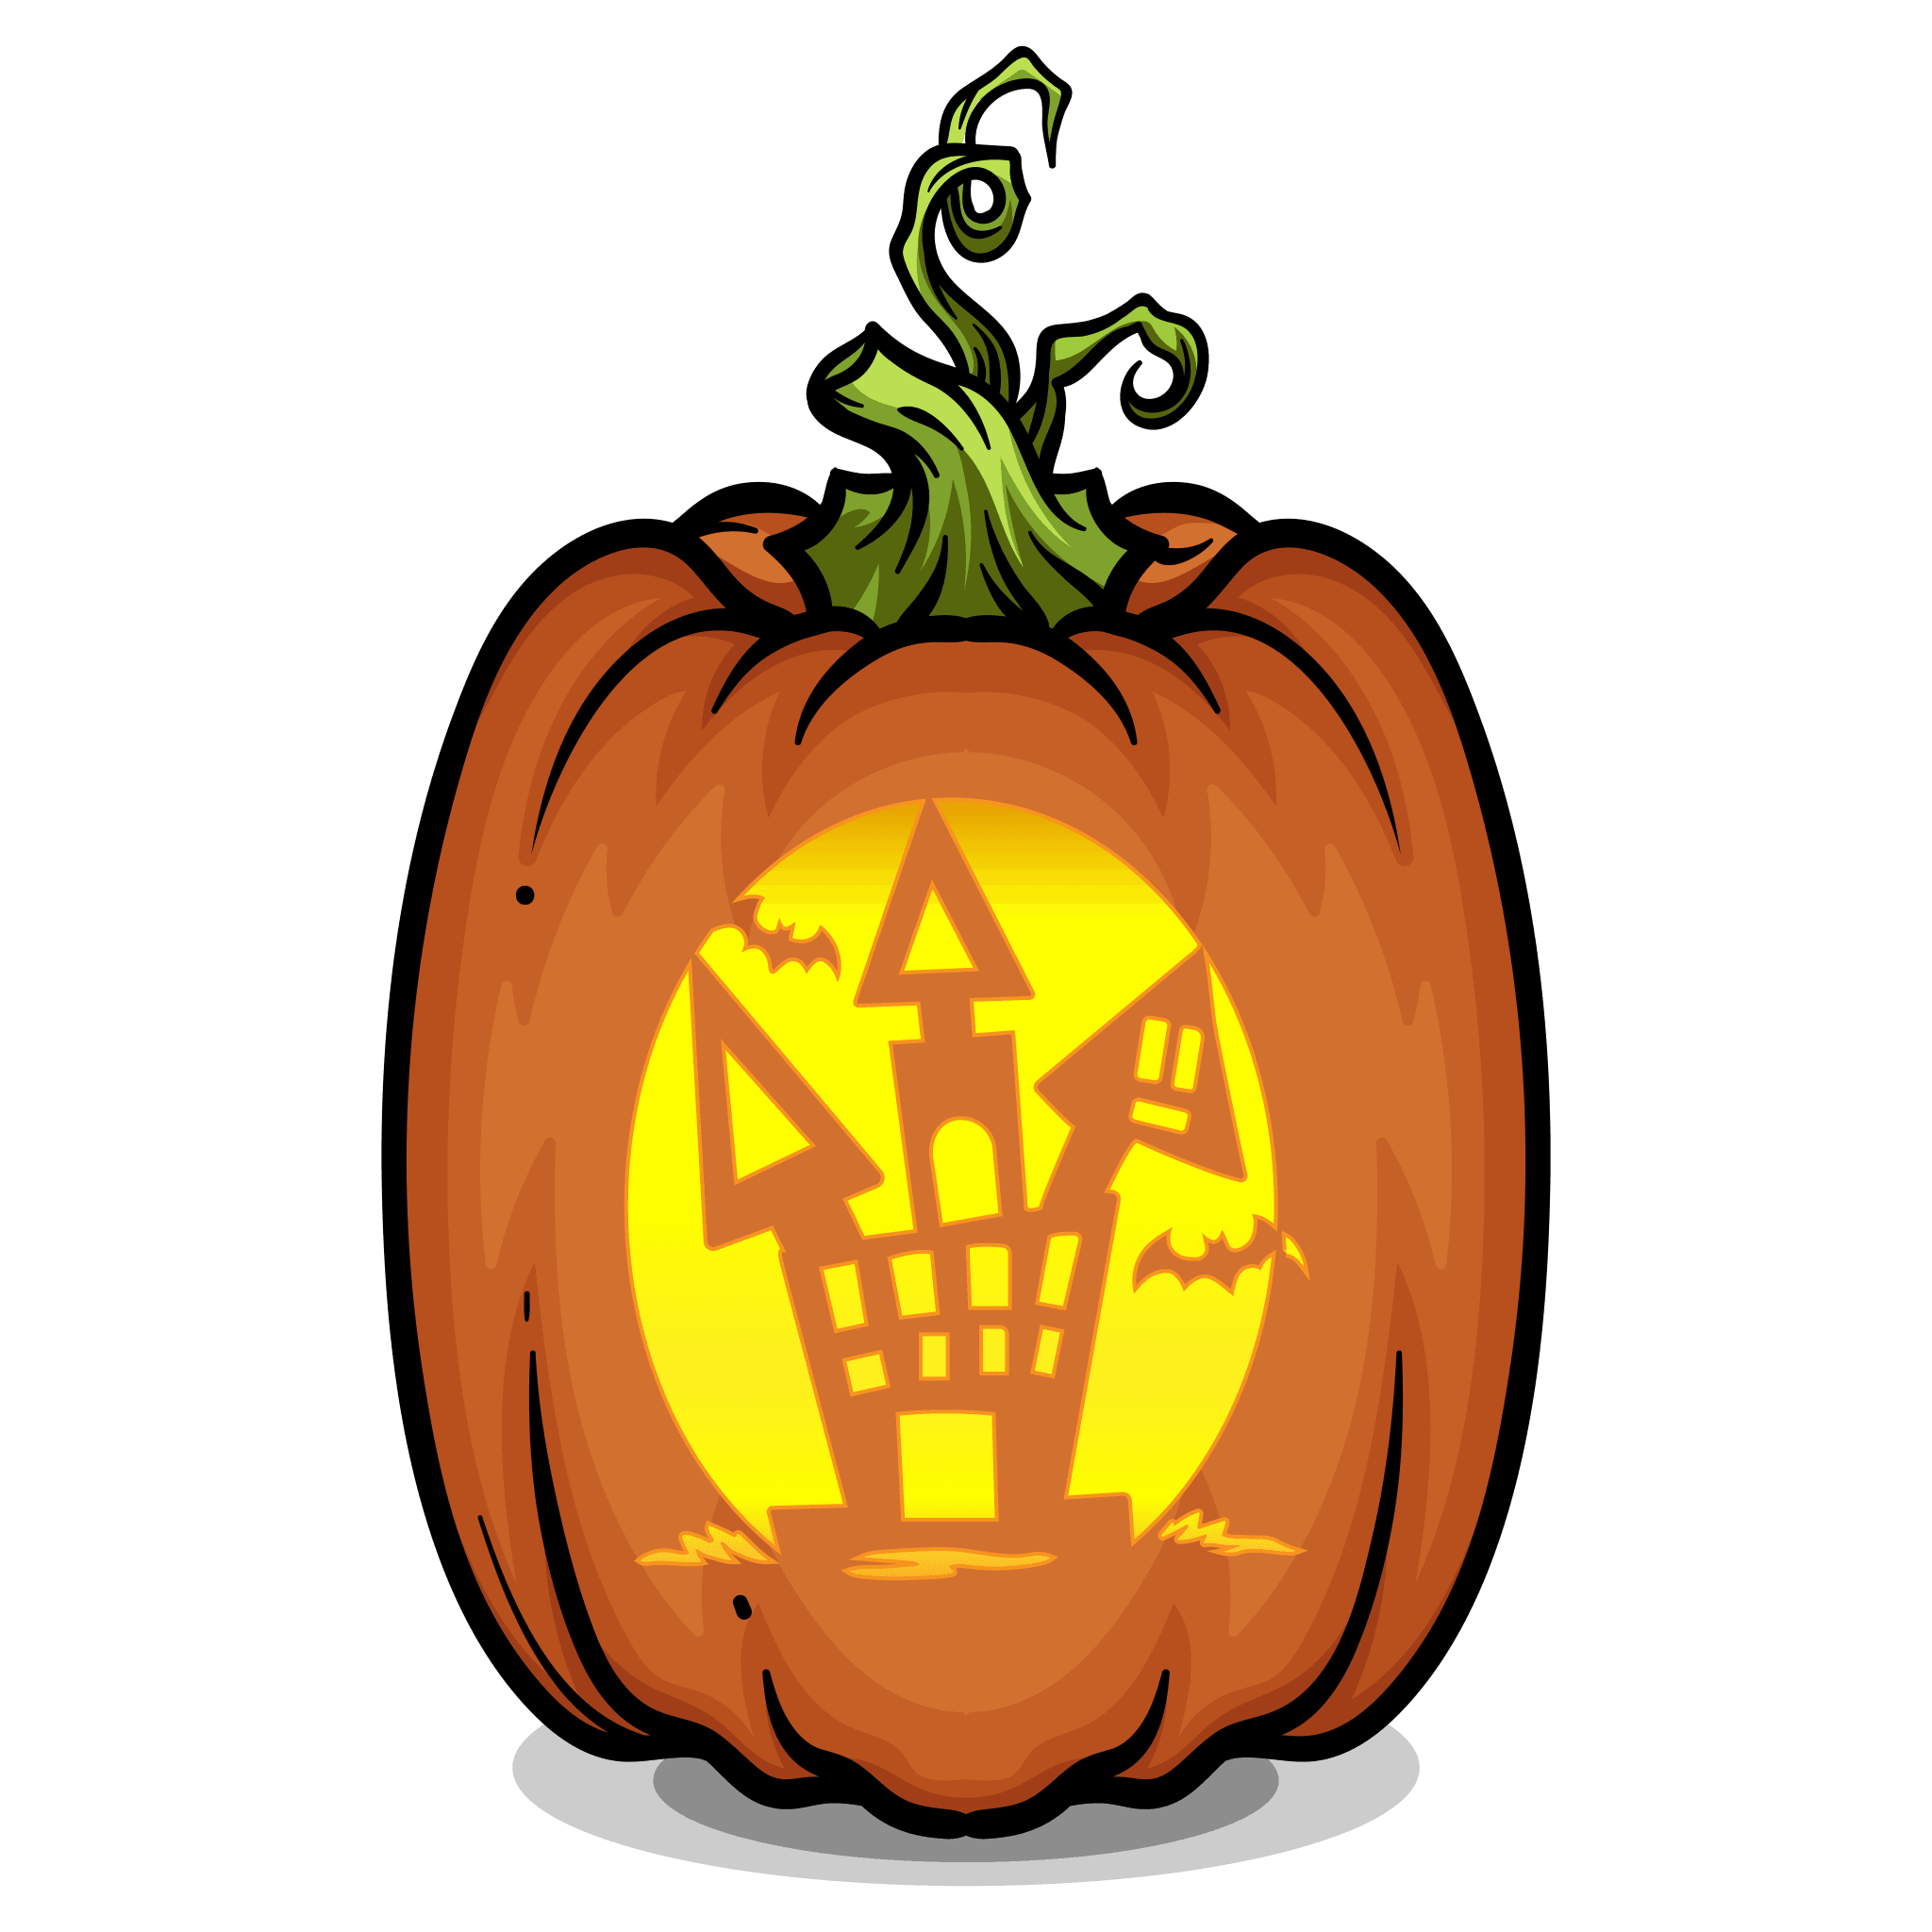 Download Creeper Clipart HQ PNG Image